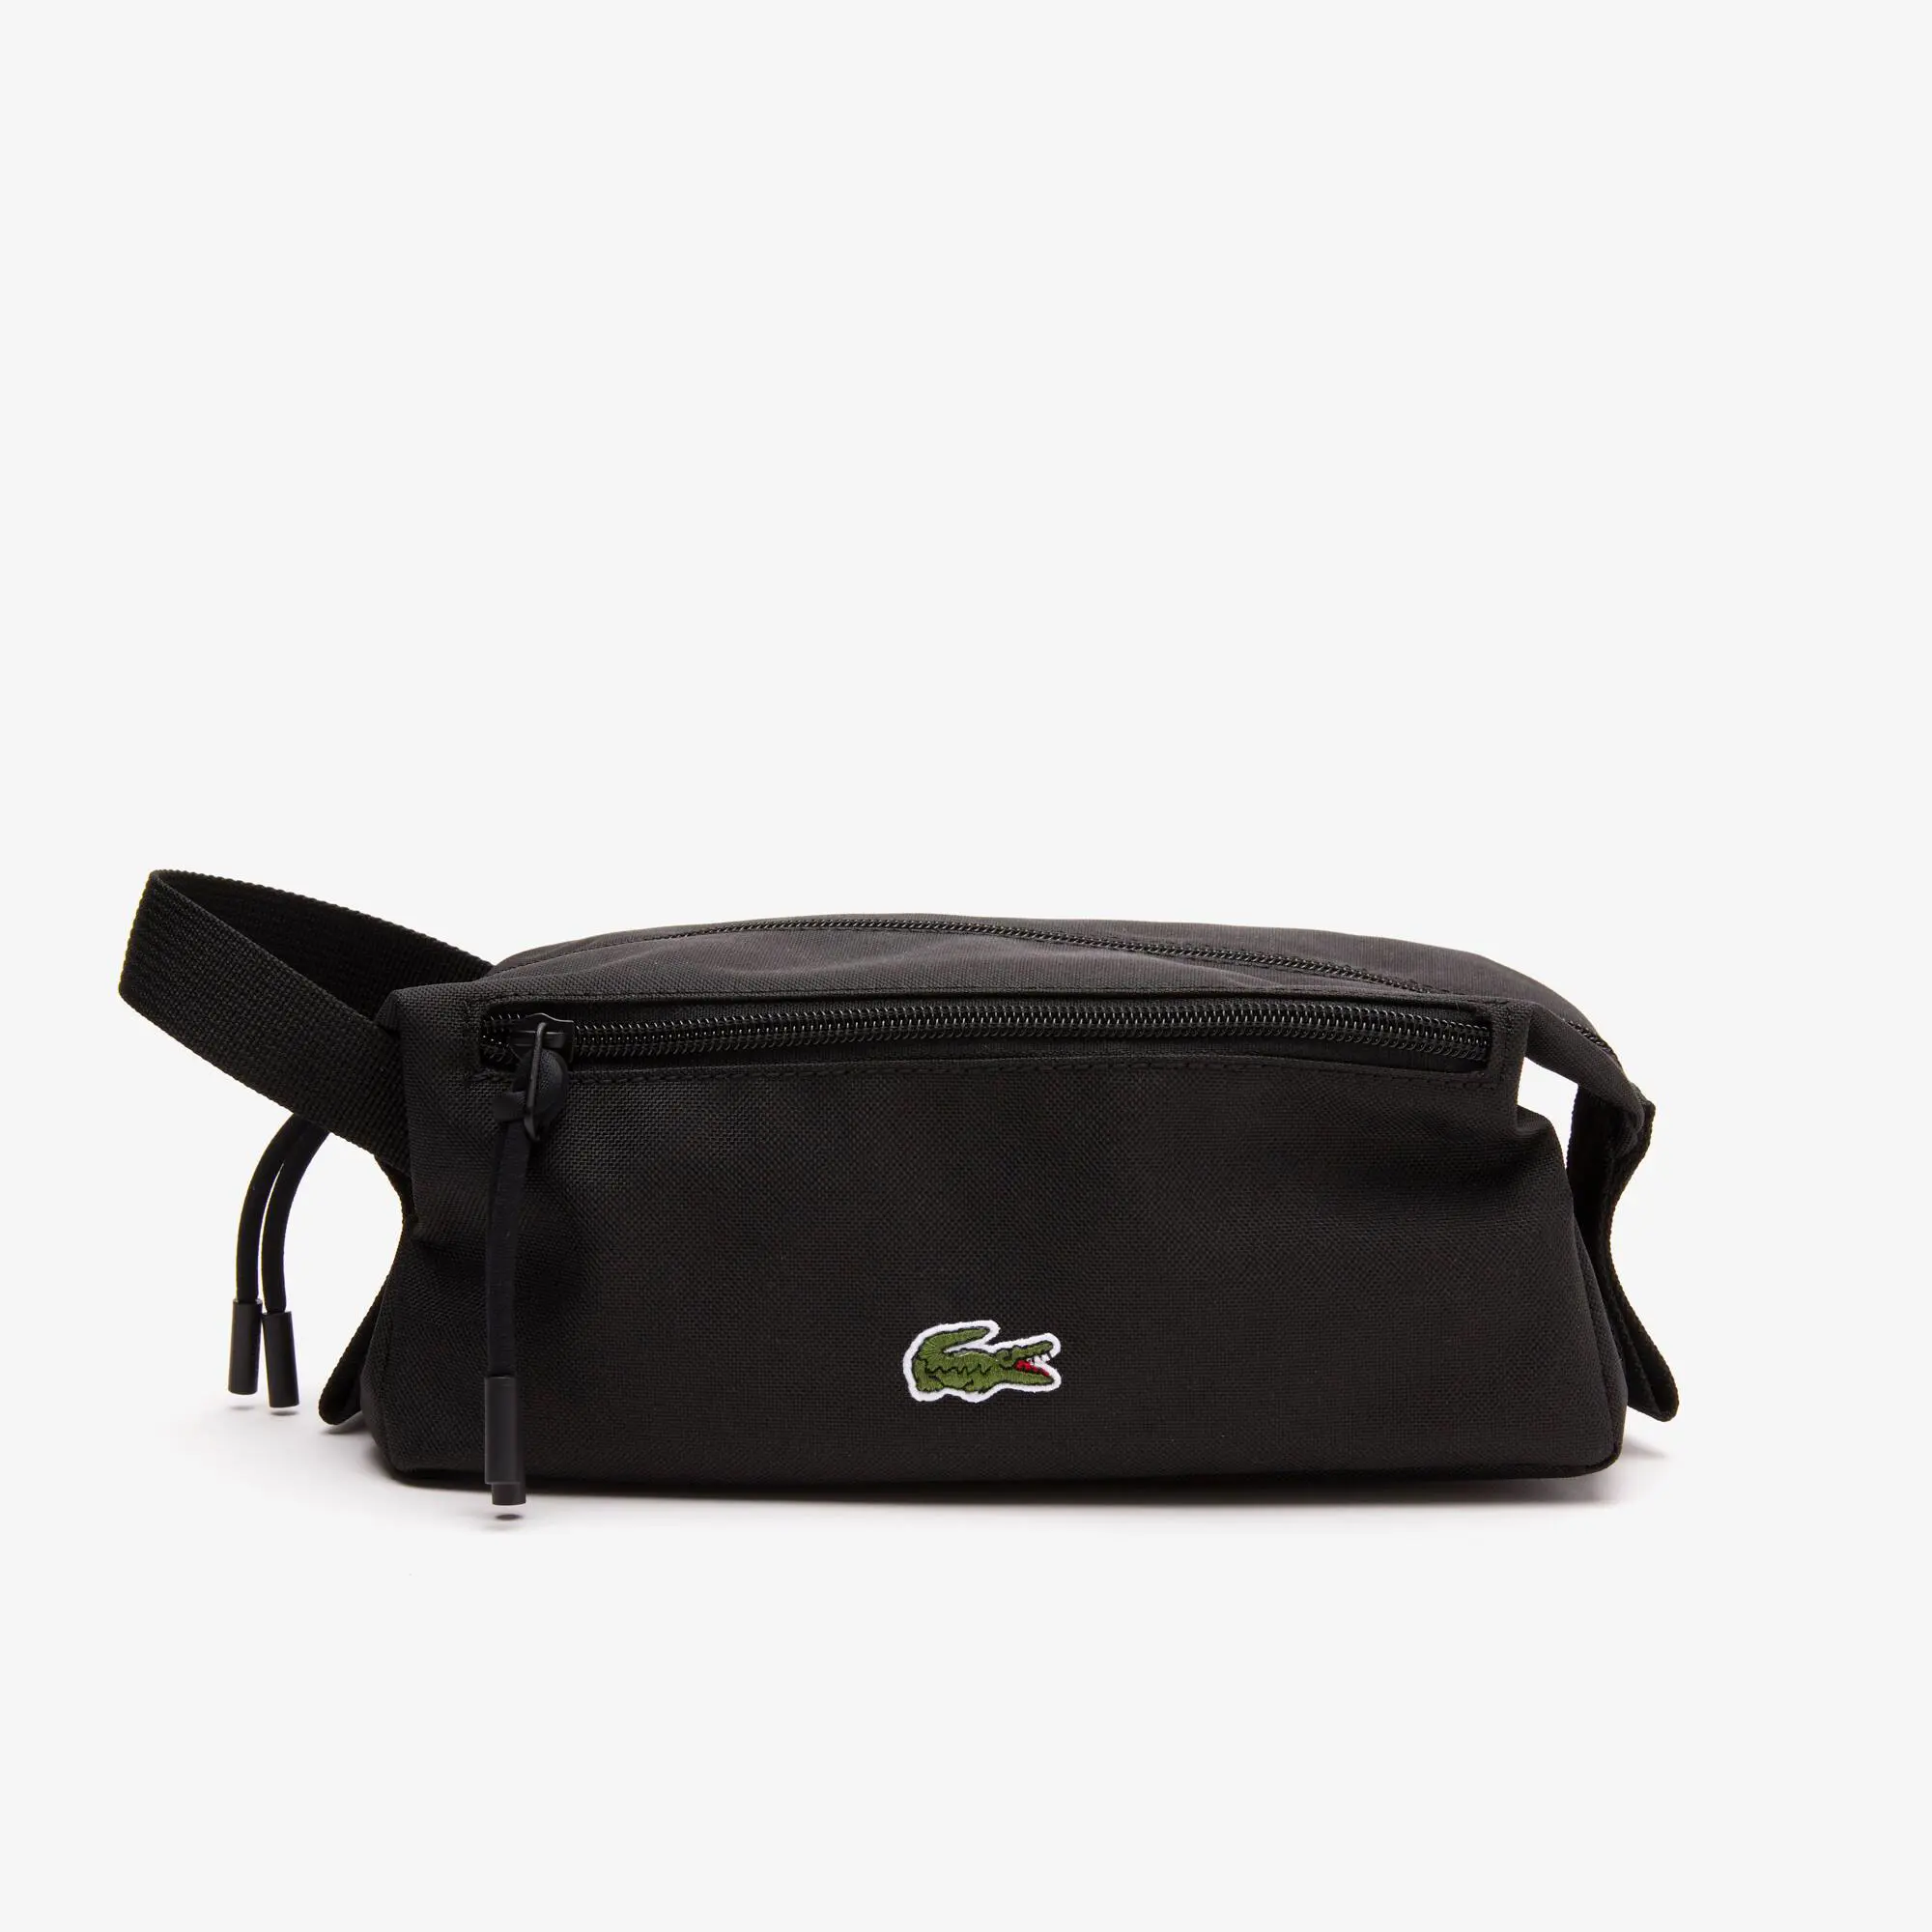 Lacoste Unisex Zippered Toiletry Bag. 1